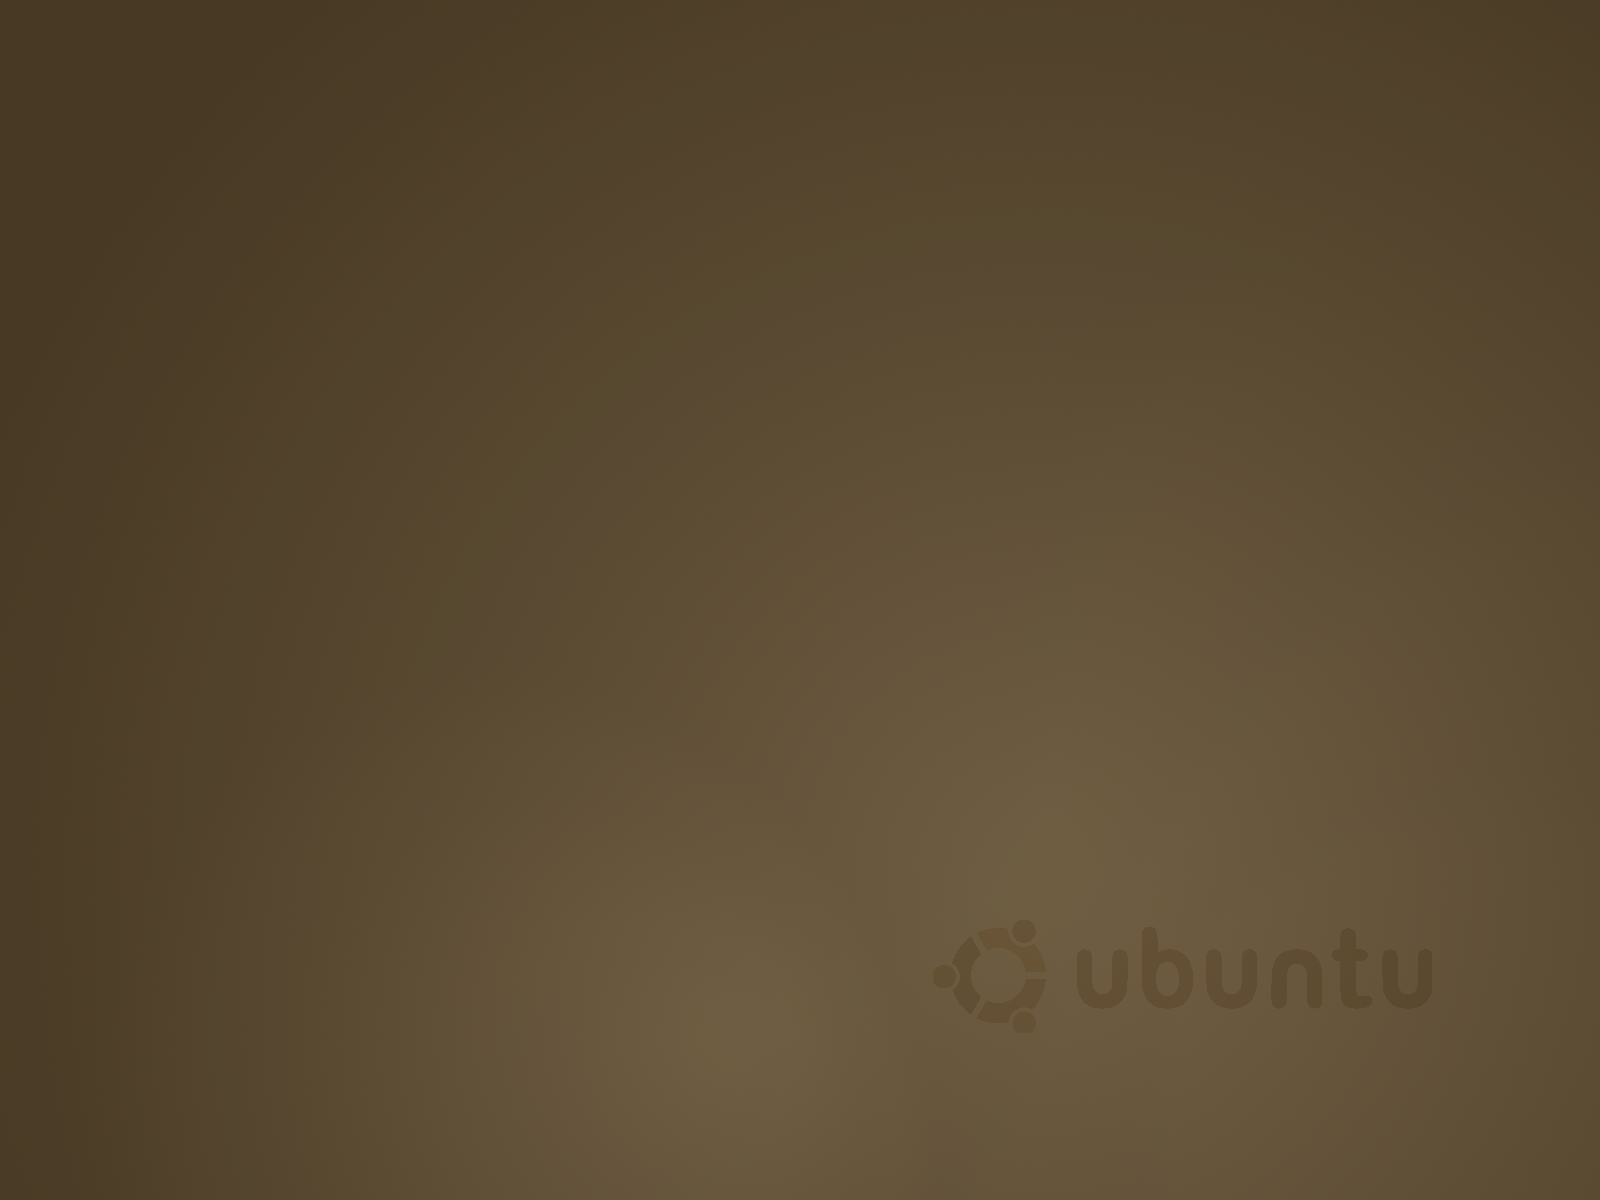 This Is Every Default Ubuntu Wallpaper From 410 to 1504